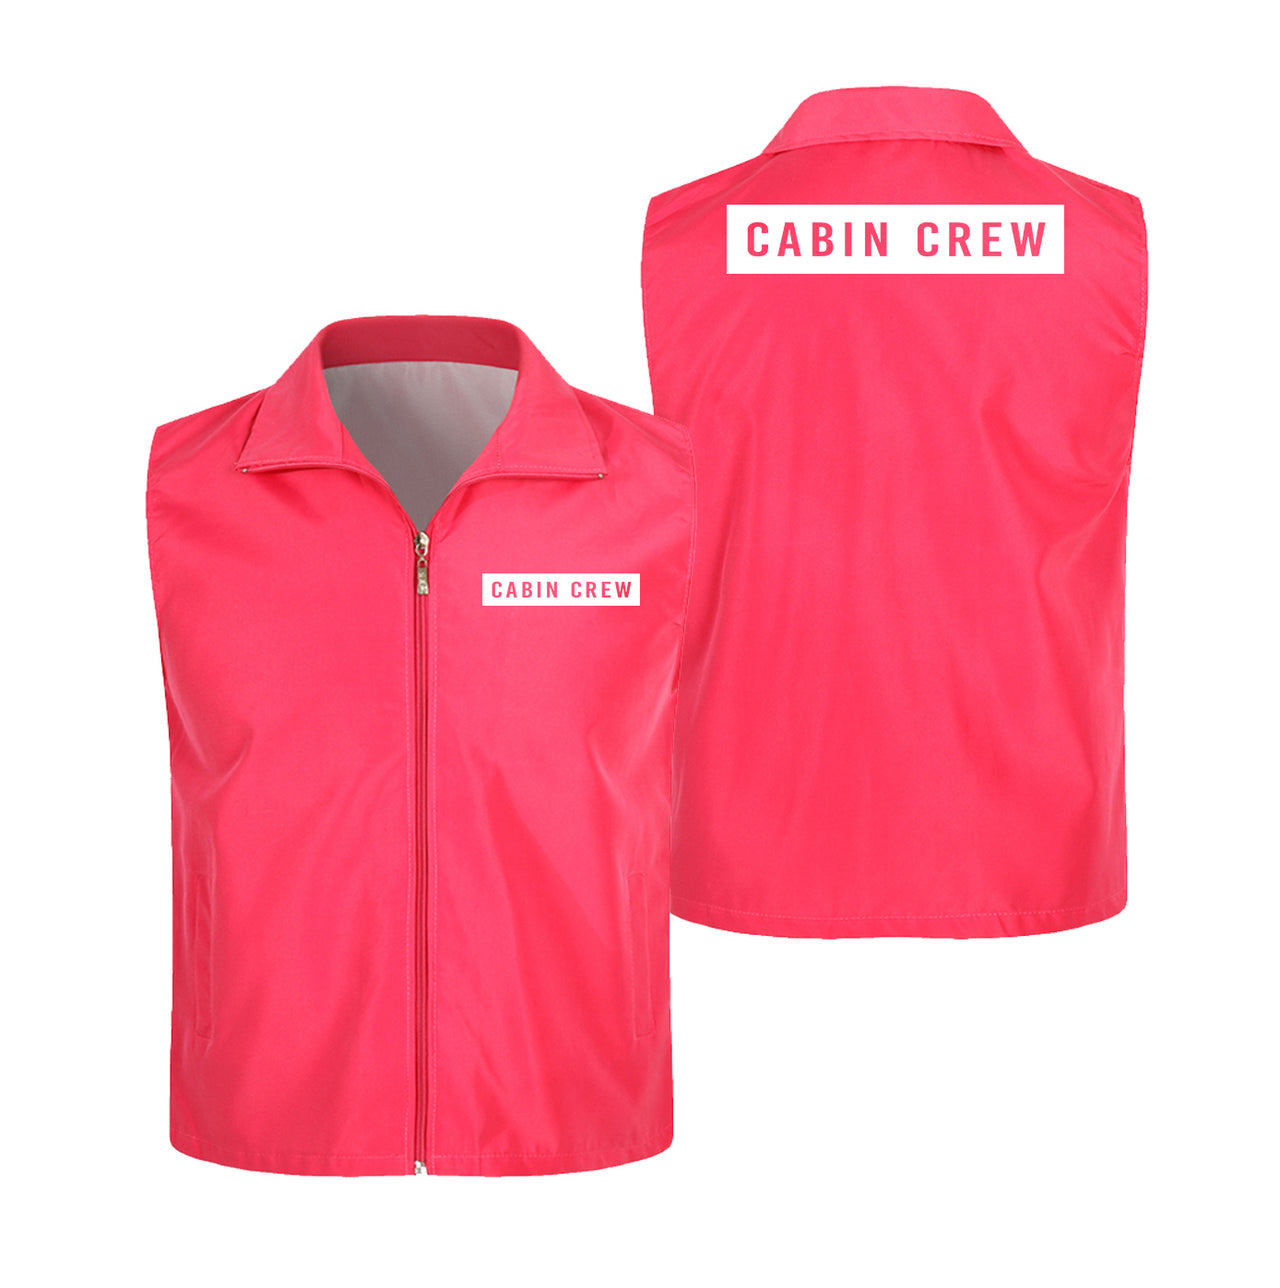 Cabin Crew Text Designed Thin Style Vests